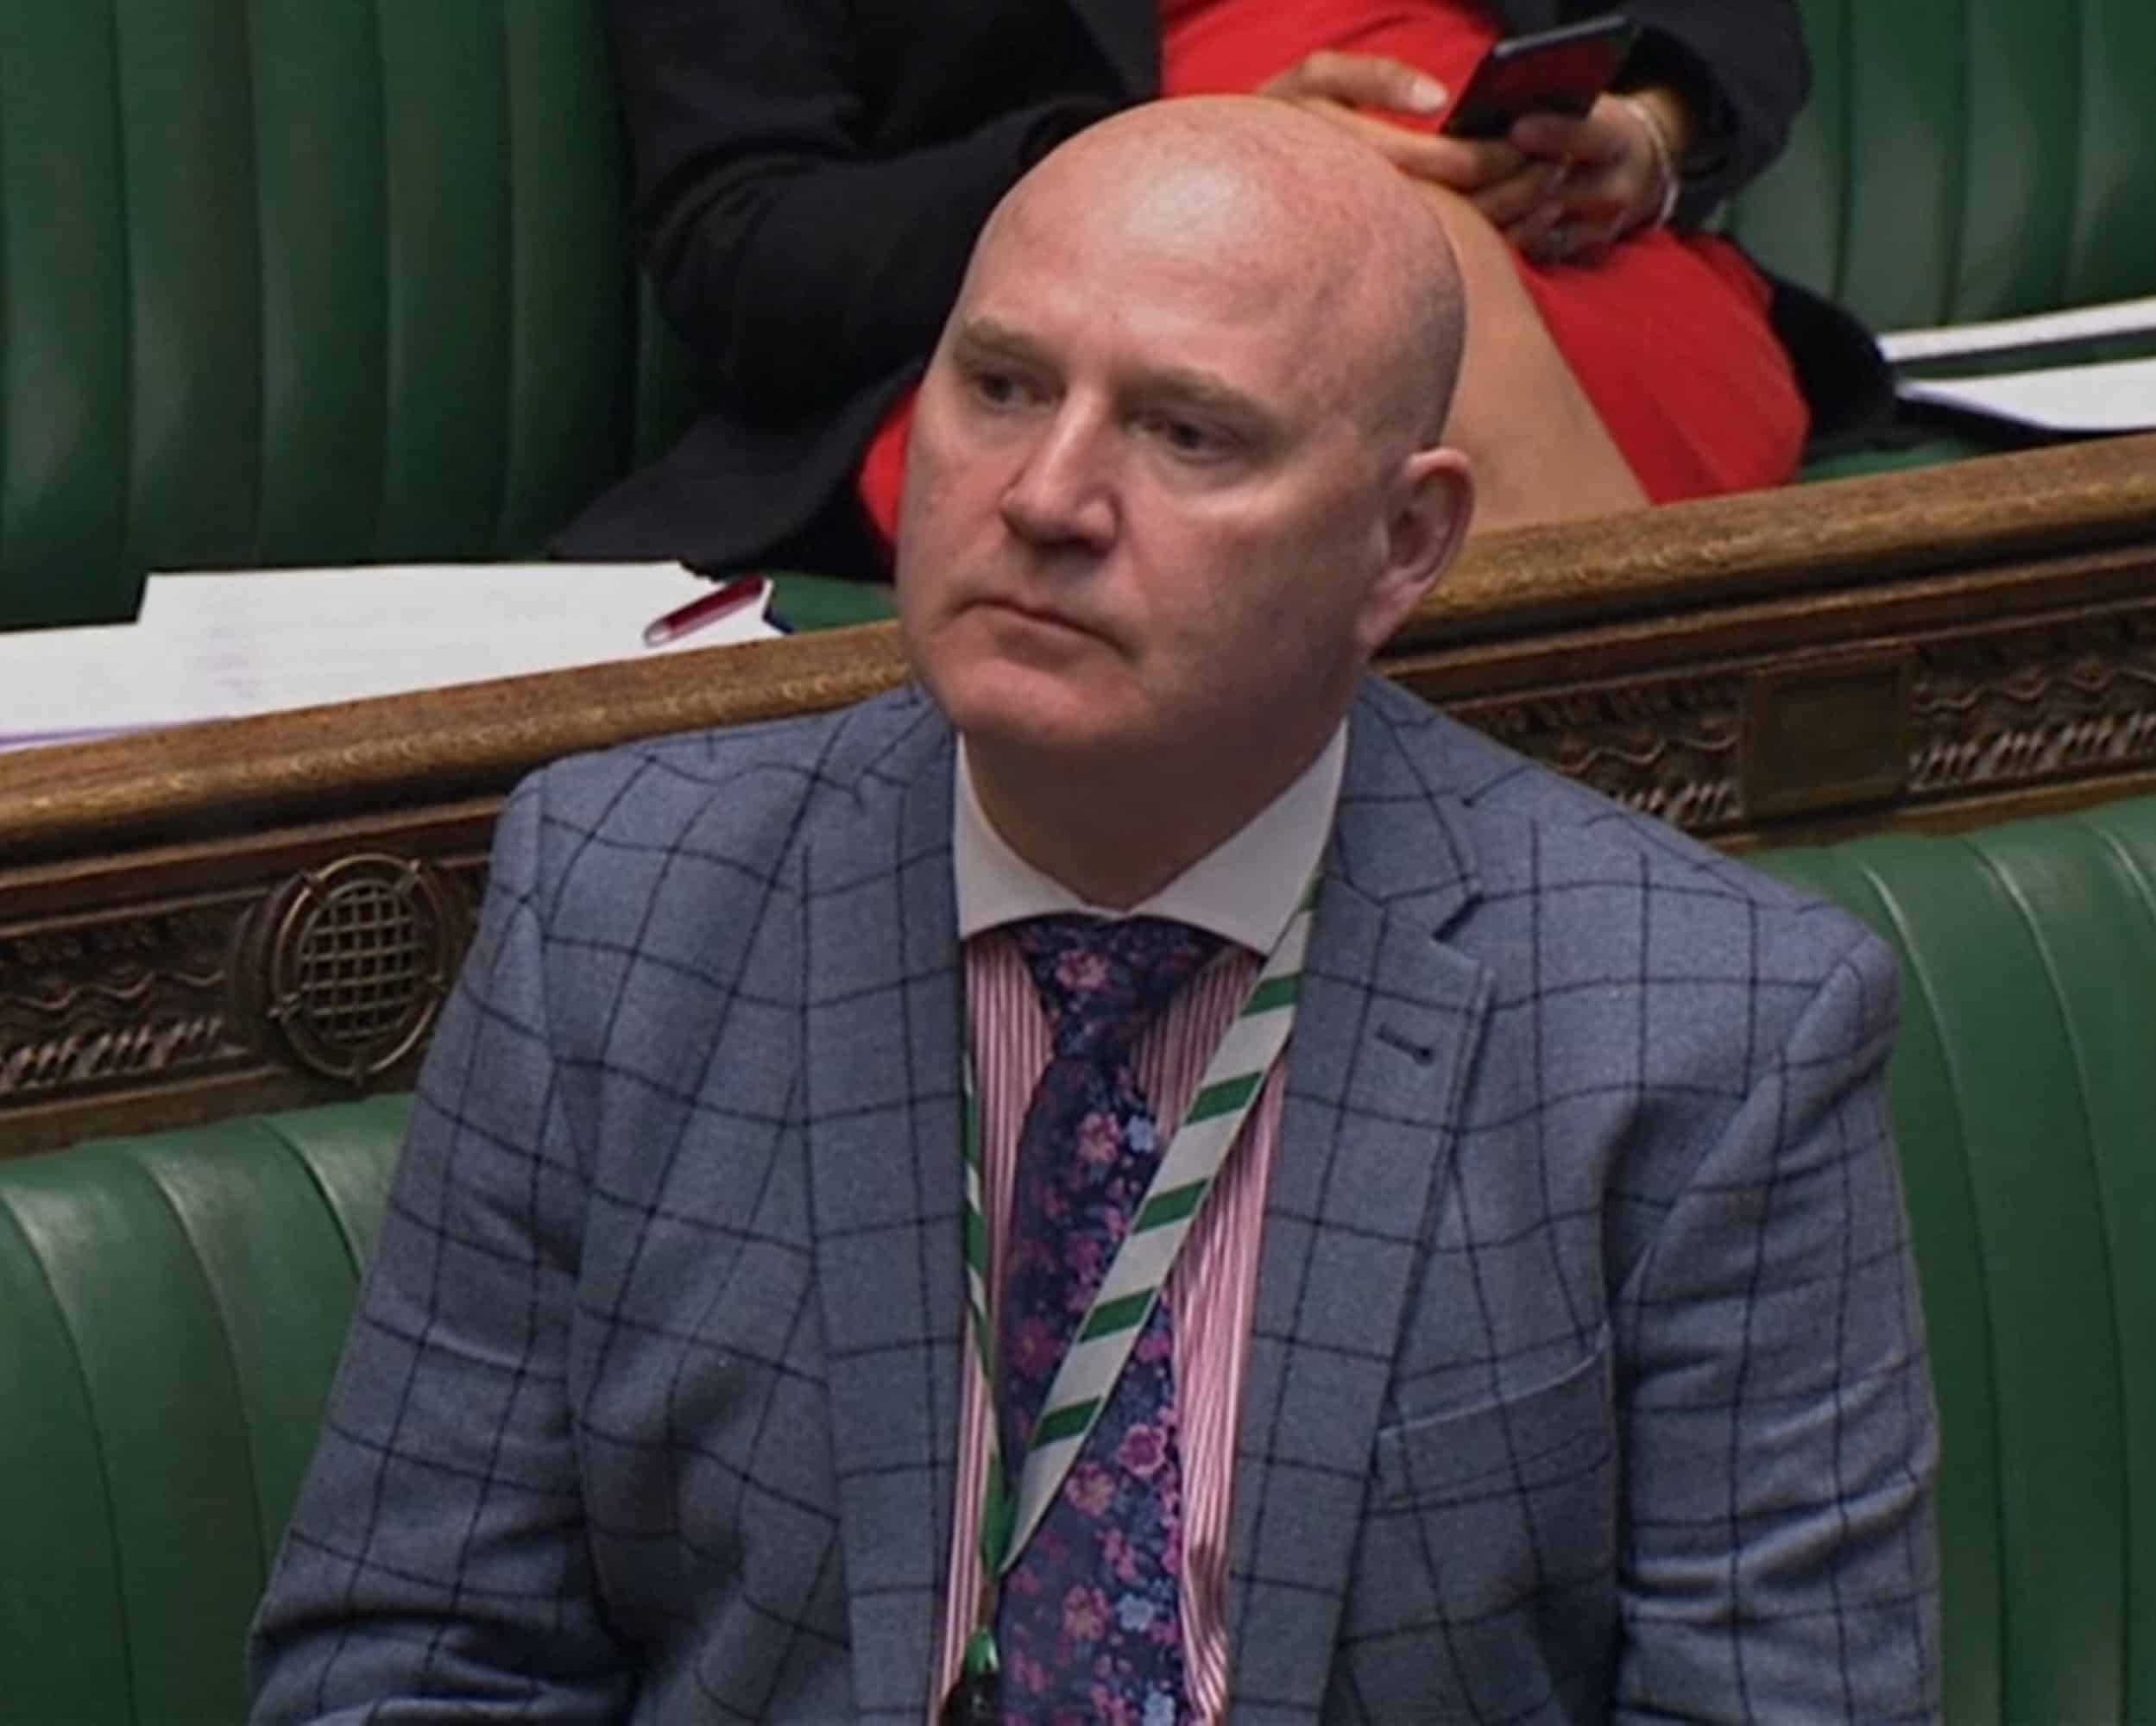 Watch: MP confronts Sunak, saying people of Scotland are ‘hostages in a territorial British colony’